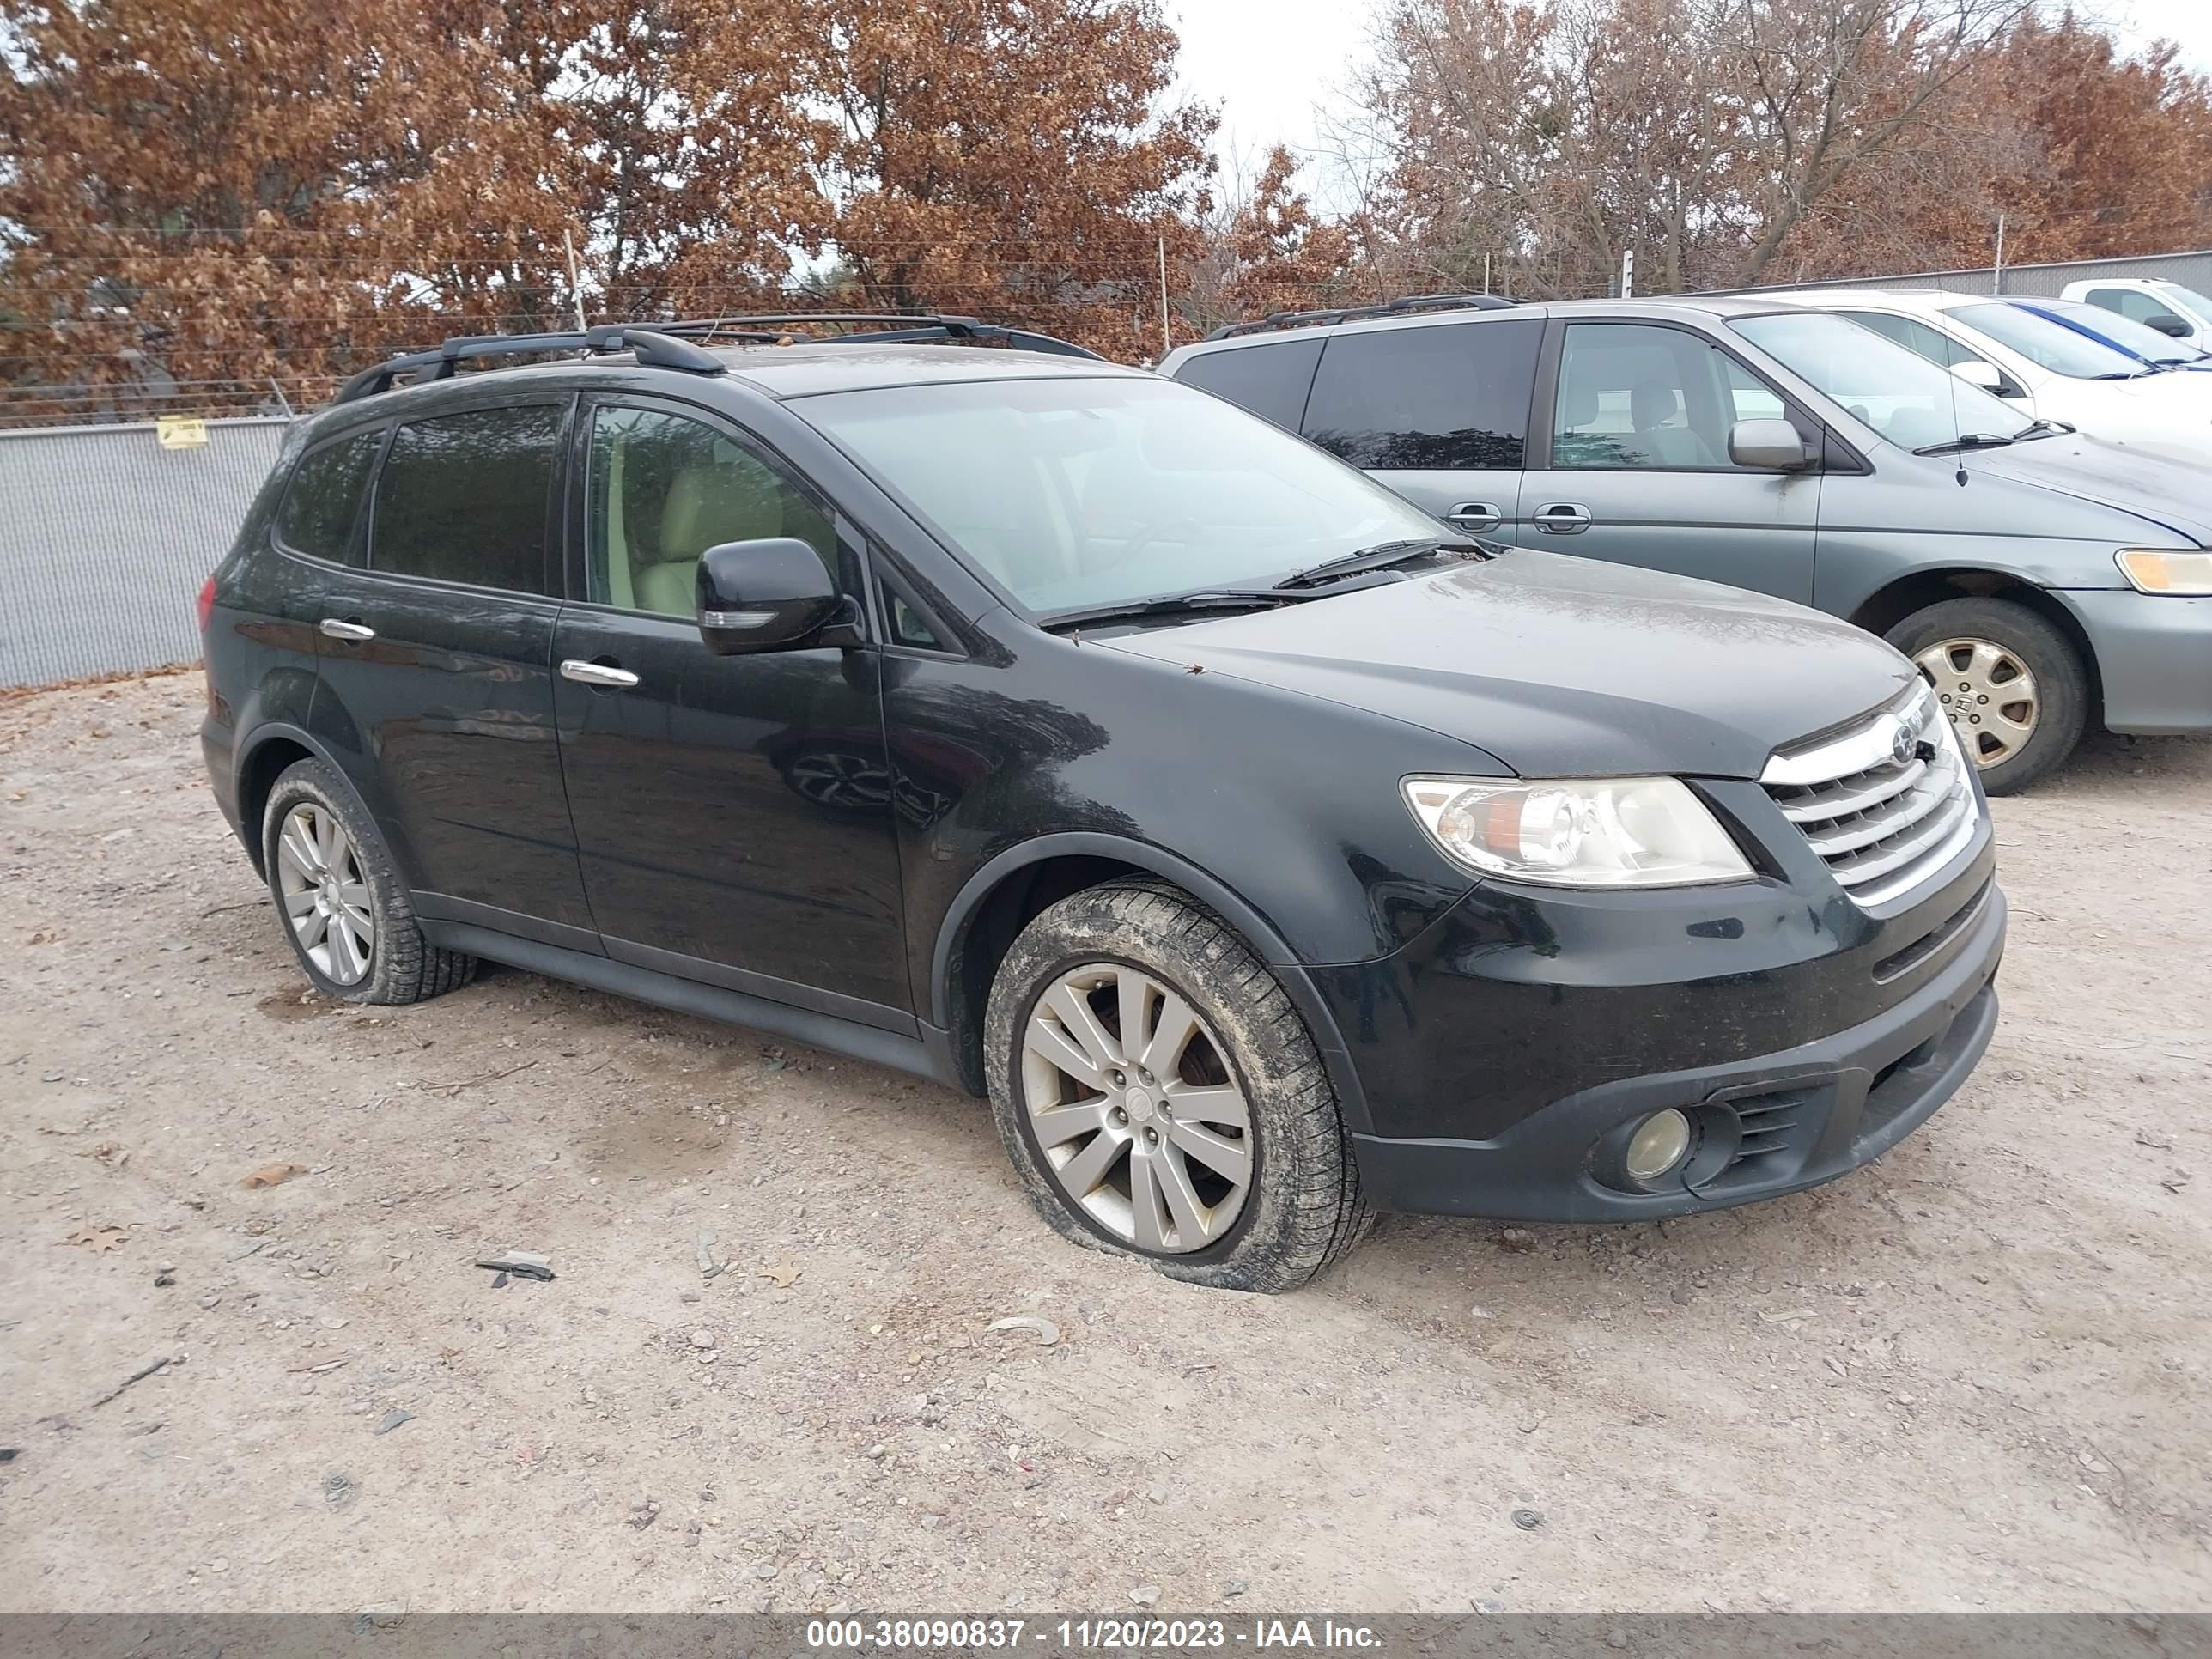 vin: 4S4WX98DX84414193 4S4WX98DX84414193 2008 subaru tribeca 3600 for Sale in 53901, W10321 State Road 16, Portage, USA